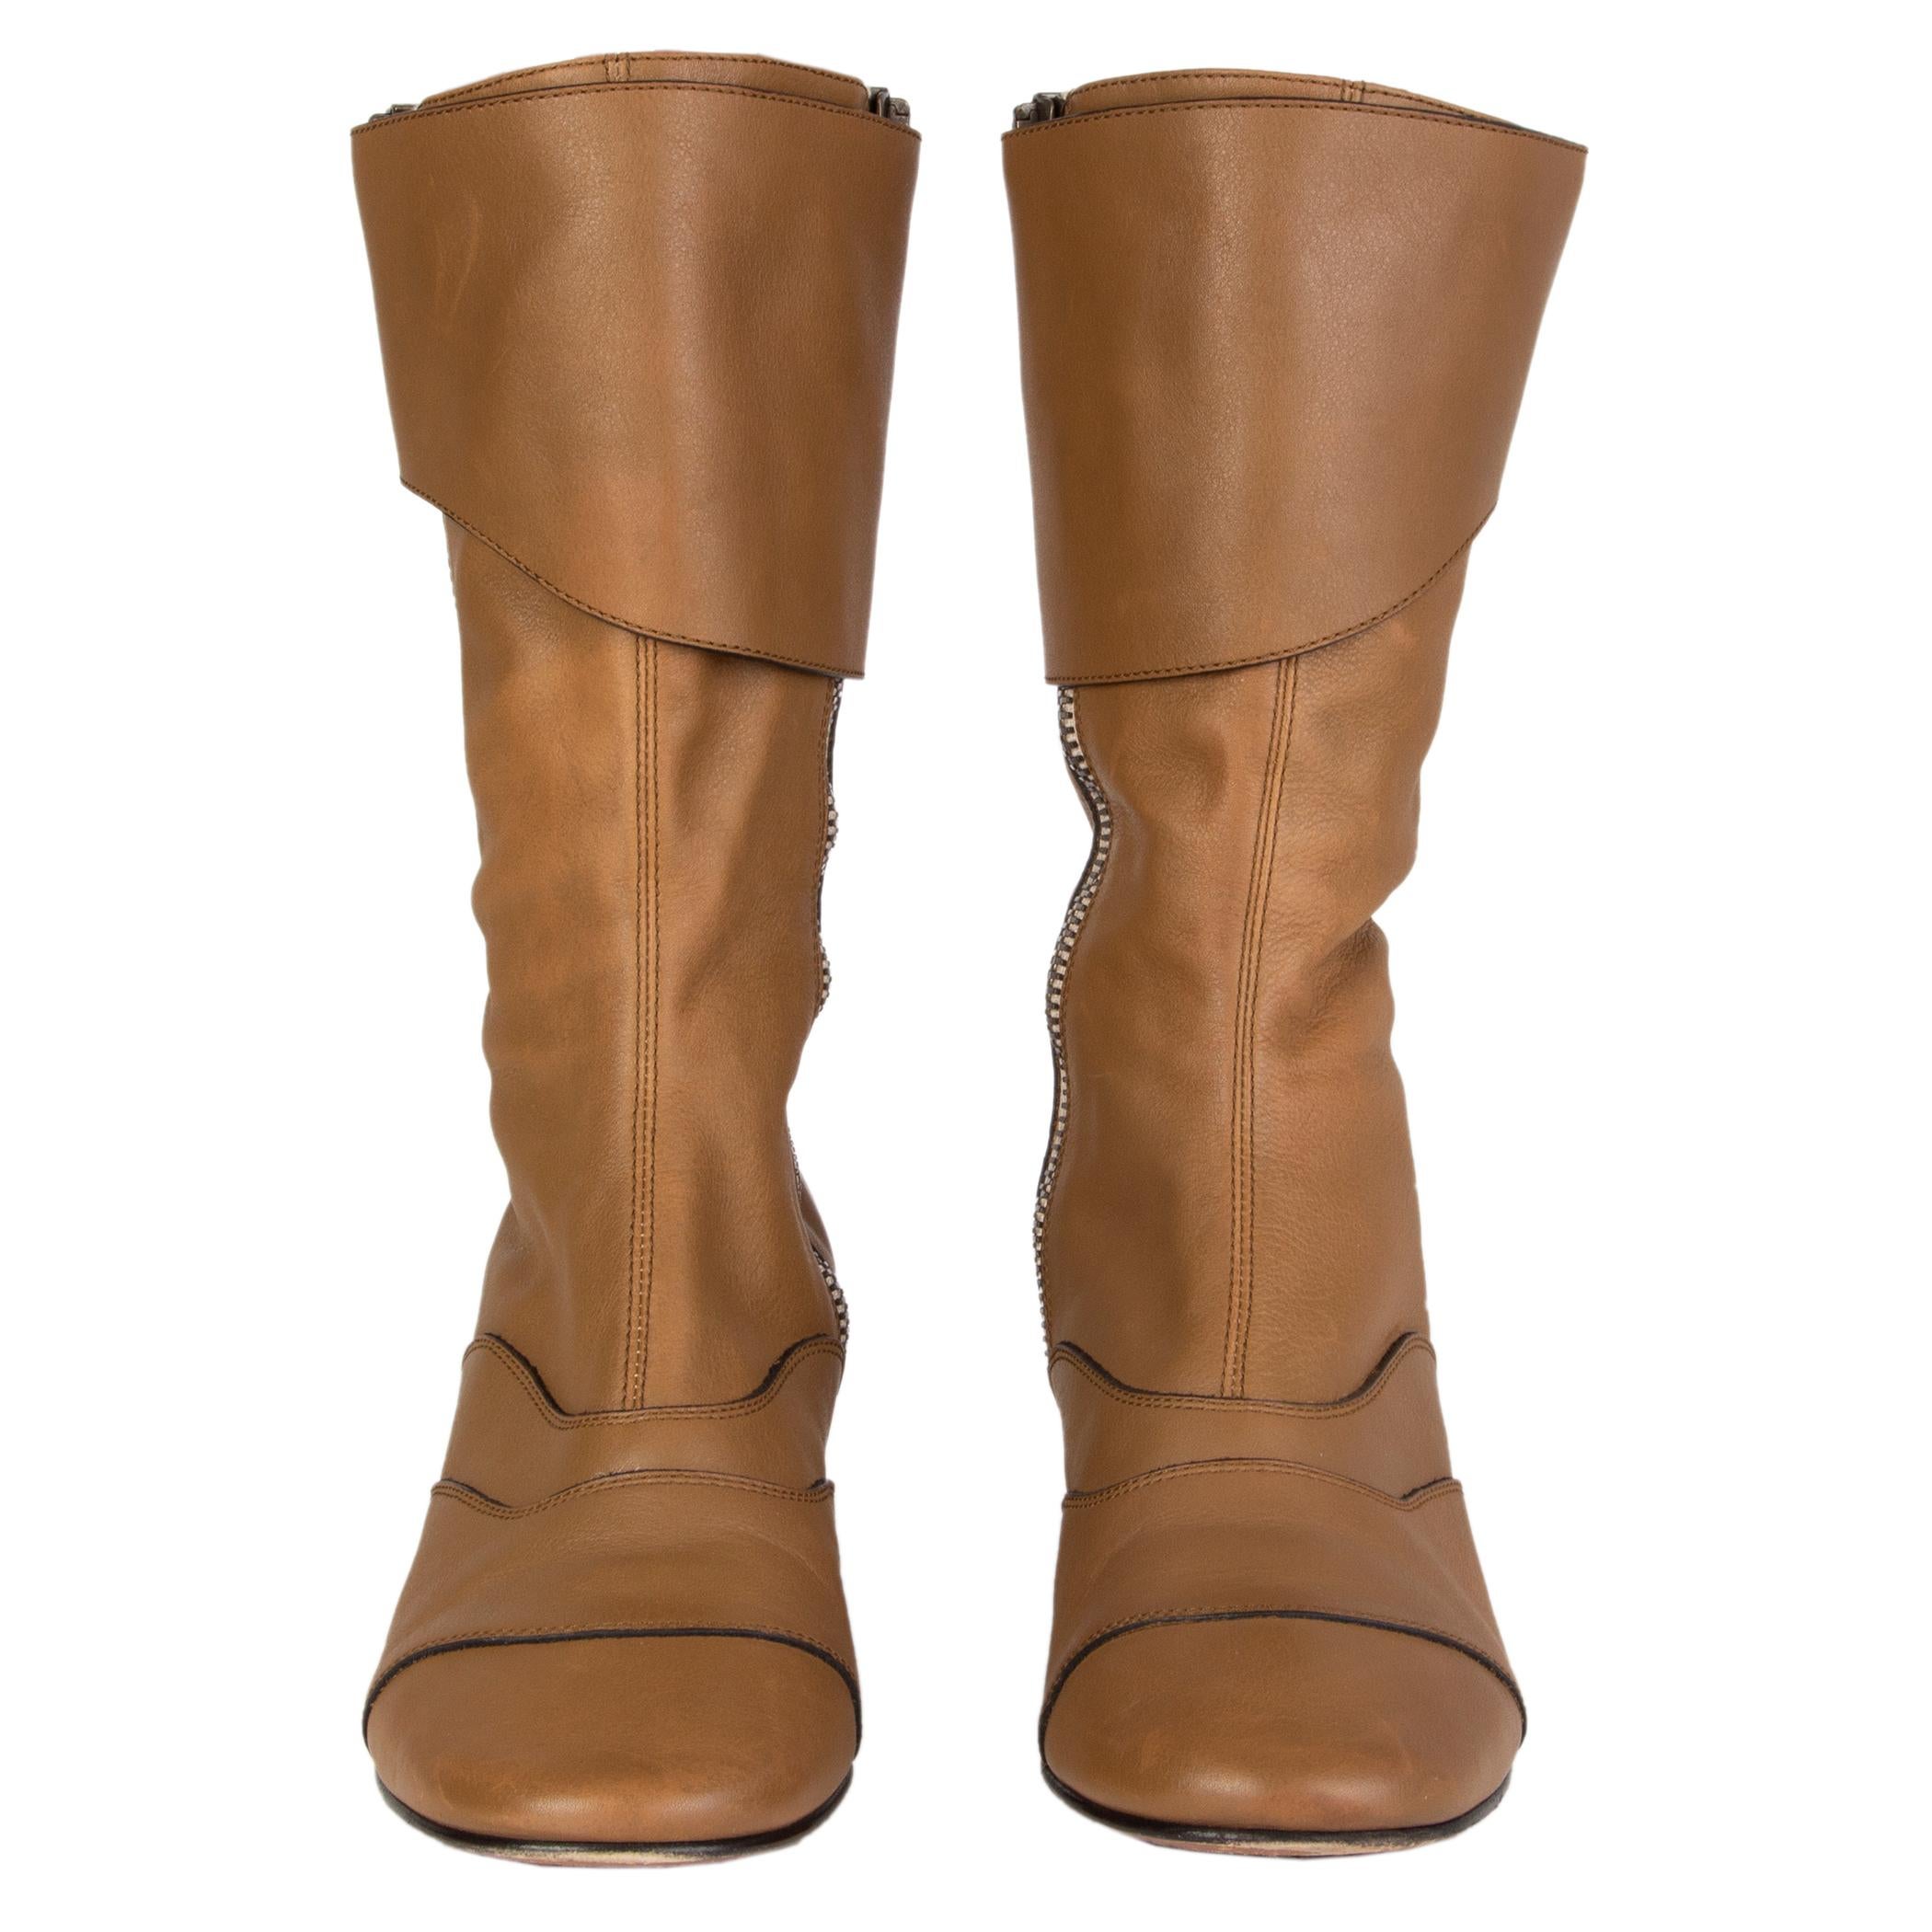 100% authentic Chloé mid-calf boots in beige leather with two zippers on the inside and outside featuring velcro flap closure. Have been worn and are in excellent condition. 

Measurements
Imprinted Size	39.5
Shoe Size	39.5
Inside Sole	26.5cm